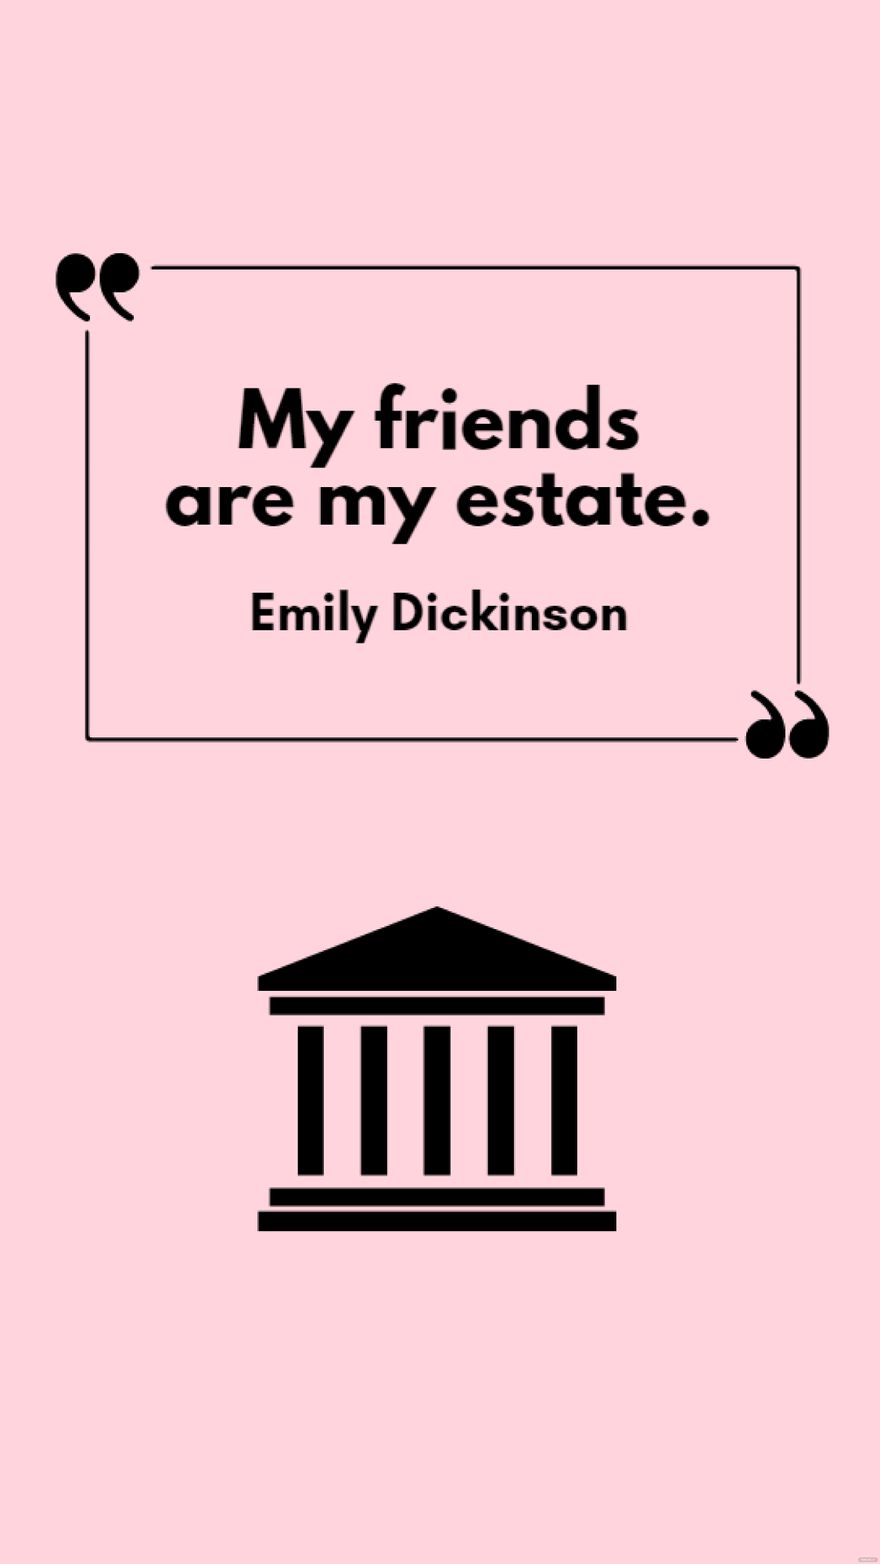 Emily Dickinson - My friends are my estate.